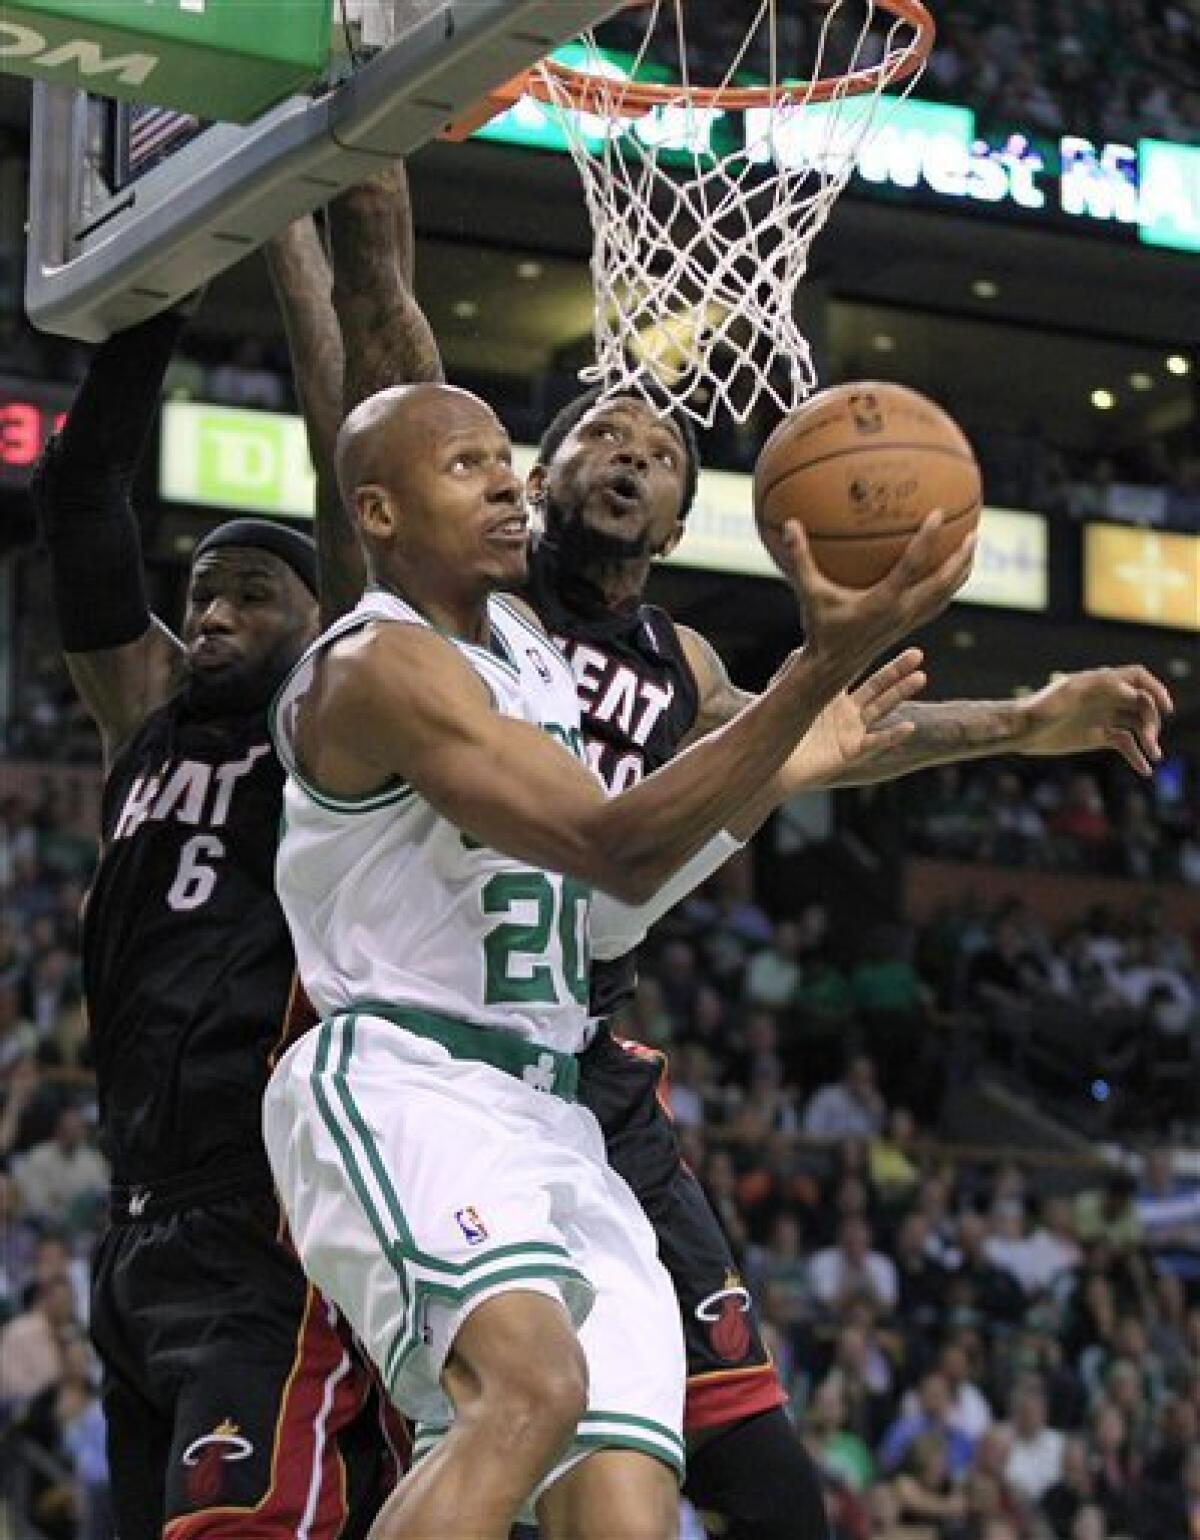 Jason Terry, Bucks Reportedly Agree to 1-Year Contract